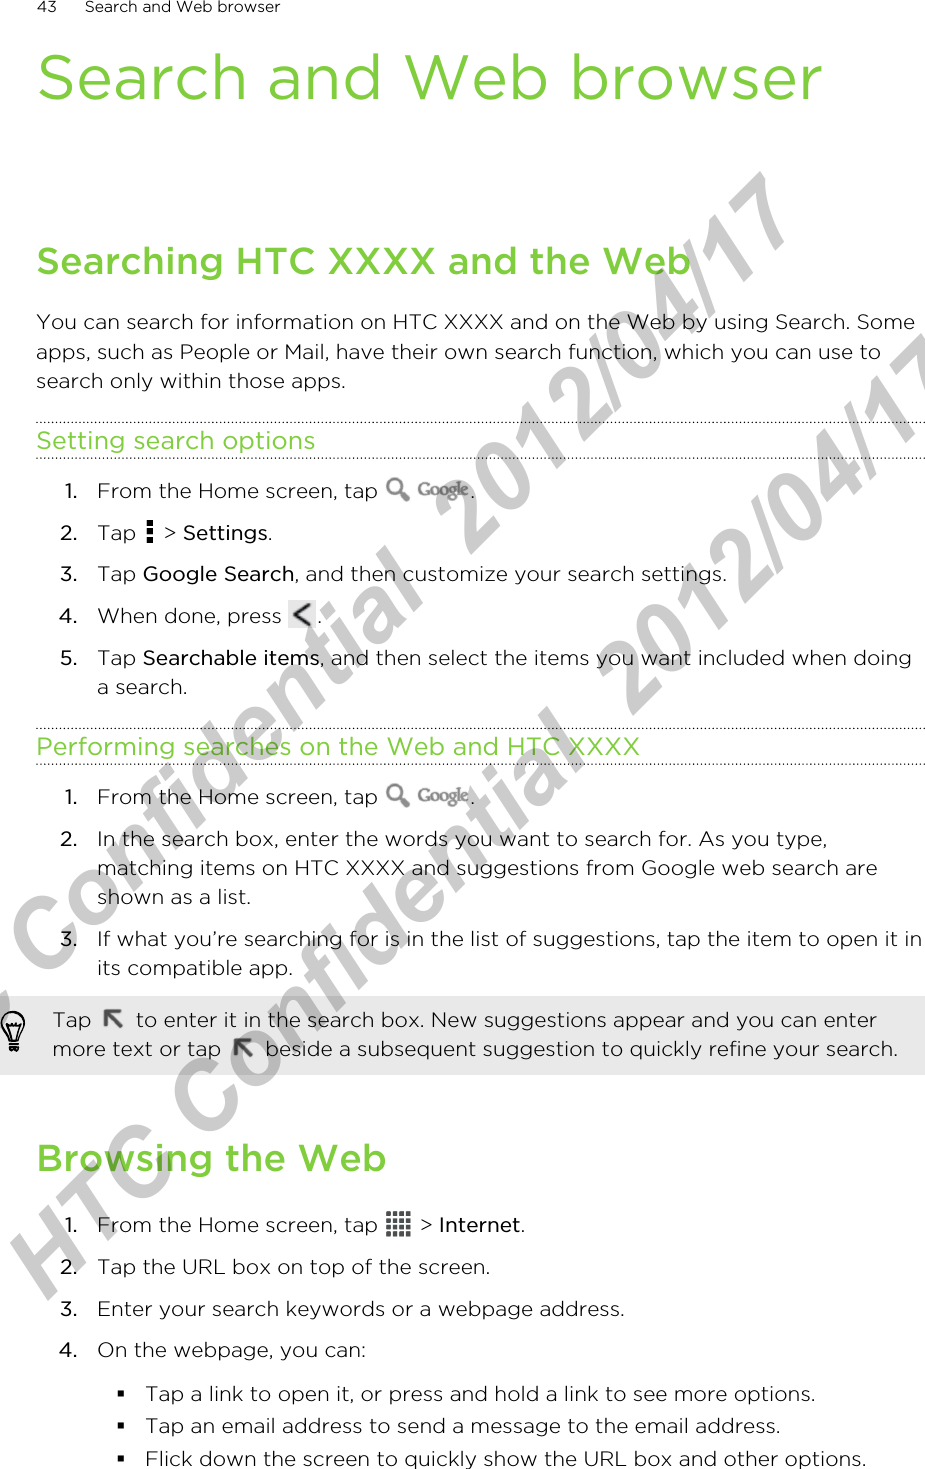 Search and Web browserSearching HTC XXXX and the WebYou can search for information on HTC XXXX and on the Web by using Search. Someapps, such as People or Mail, have their own search function, which you can use tosearch only within those apps.Setting search options1. From the Home screen, tap  .2. Tap   &gt; Settings.3. Tap Google Search, and then customize your search settings.4. When done, press  .5. Tap Searchable items, and then select the items you want included when doinga search.Performing searches on the Web and HTC XXXX1. From the Home screen, tap  .2. In the search box, enter the words you want to search for. As you type,matching items on HTC XXXX and suggestions from Google web search areshown as a list.3. If what you’re searching for is in the list of suggestions, tap the item to open it inits compatible app. Tap   to enter it in the search box. New suggestions appear and you can entermore text or tap   beside a subsequent suggestion to quickly refine your search.Browsing the Web1. From the Home screen, tap   &gt; Internet.2. Tap the URL box on top of the screen.3. Enter your search keywords or a webpage address.4. On the webpage, you can:§Tap a link to open it, or press and hold a link to see more options.§Tap an email address to send a message to the email address.§Flick down the screen to quickly show the URL box and other options.43 Search and Web browserHTC Confidential  2012/04/17  HTC Confidential  2012/04/17 